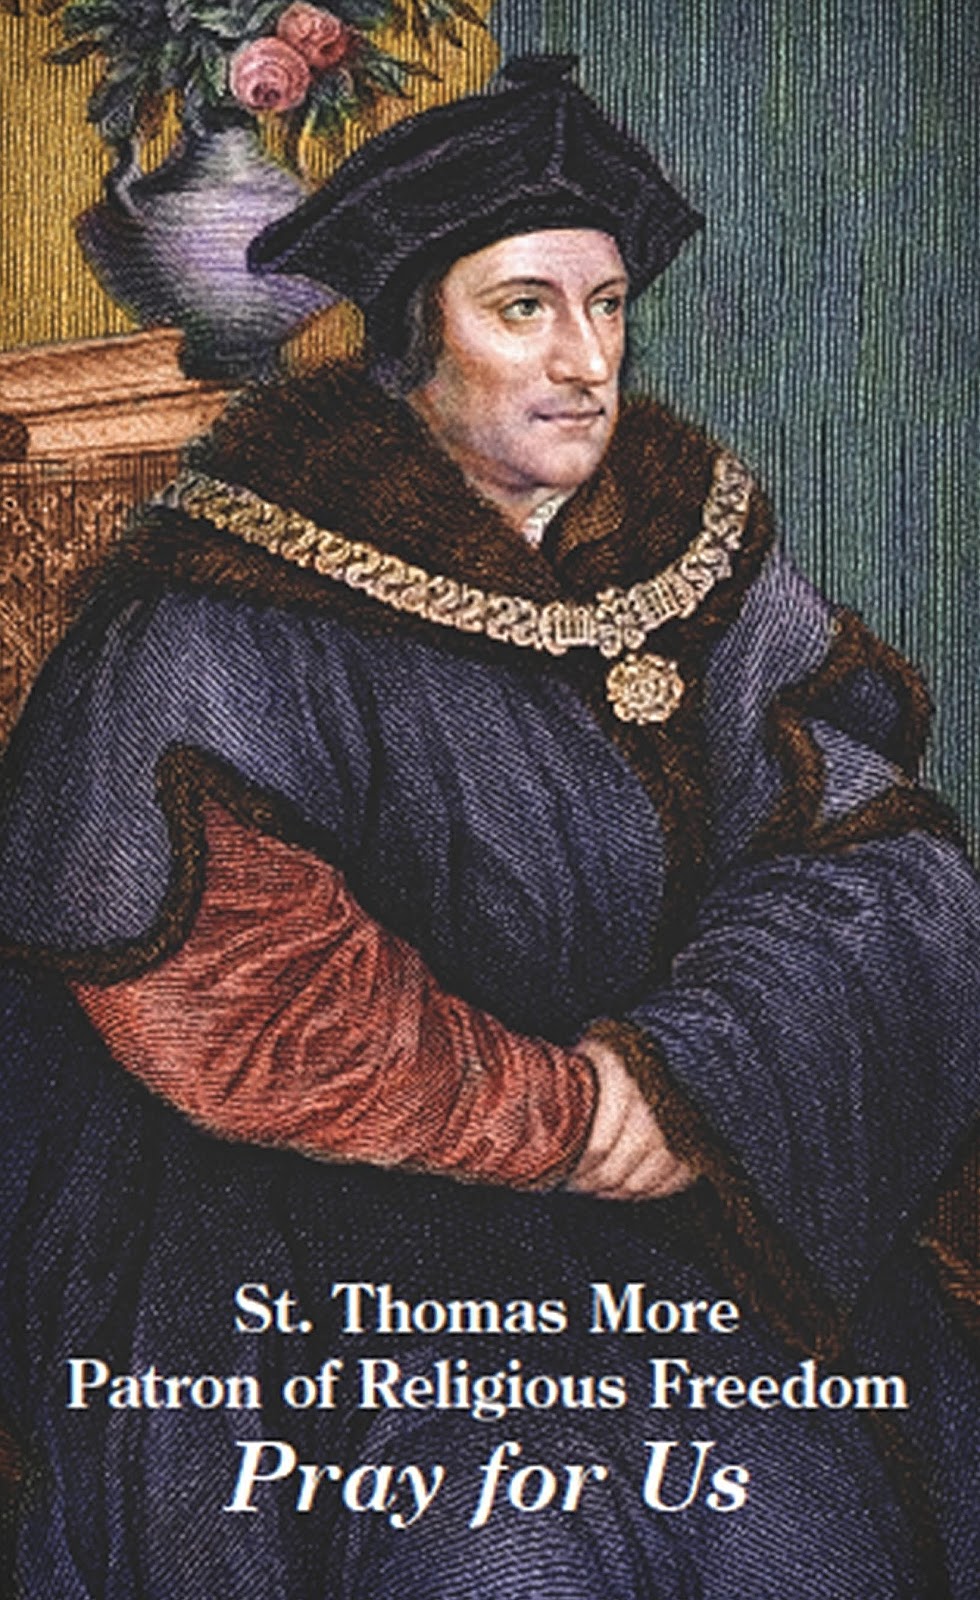 » Today Christians Commemorate St. Thomas More, Martyr for Jesus Christ